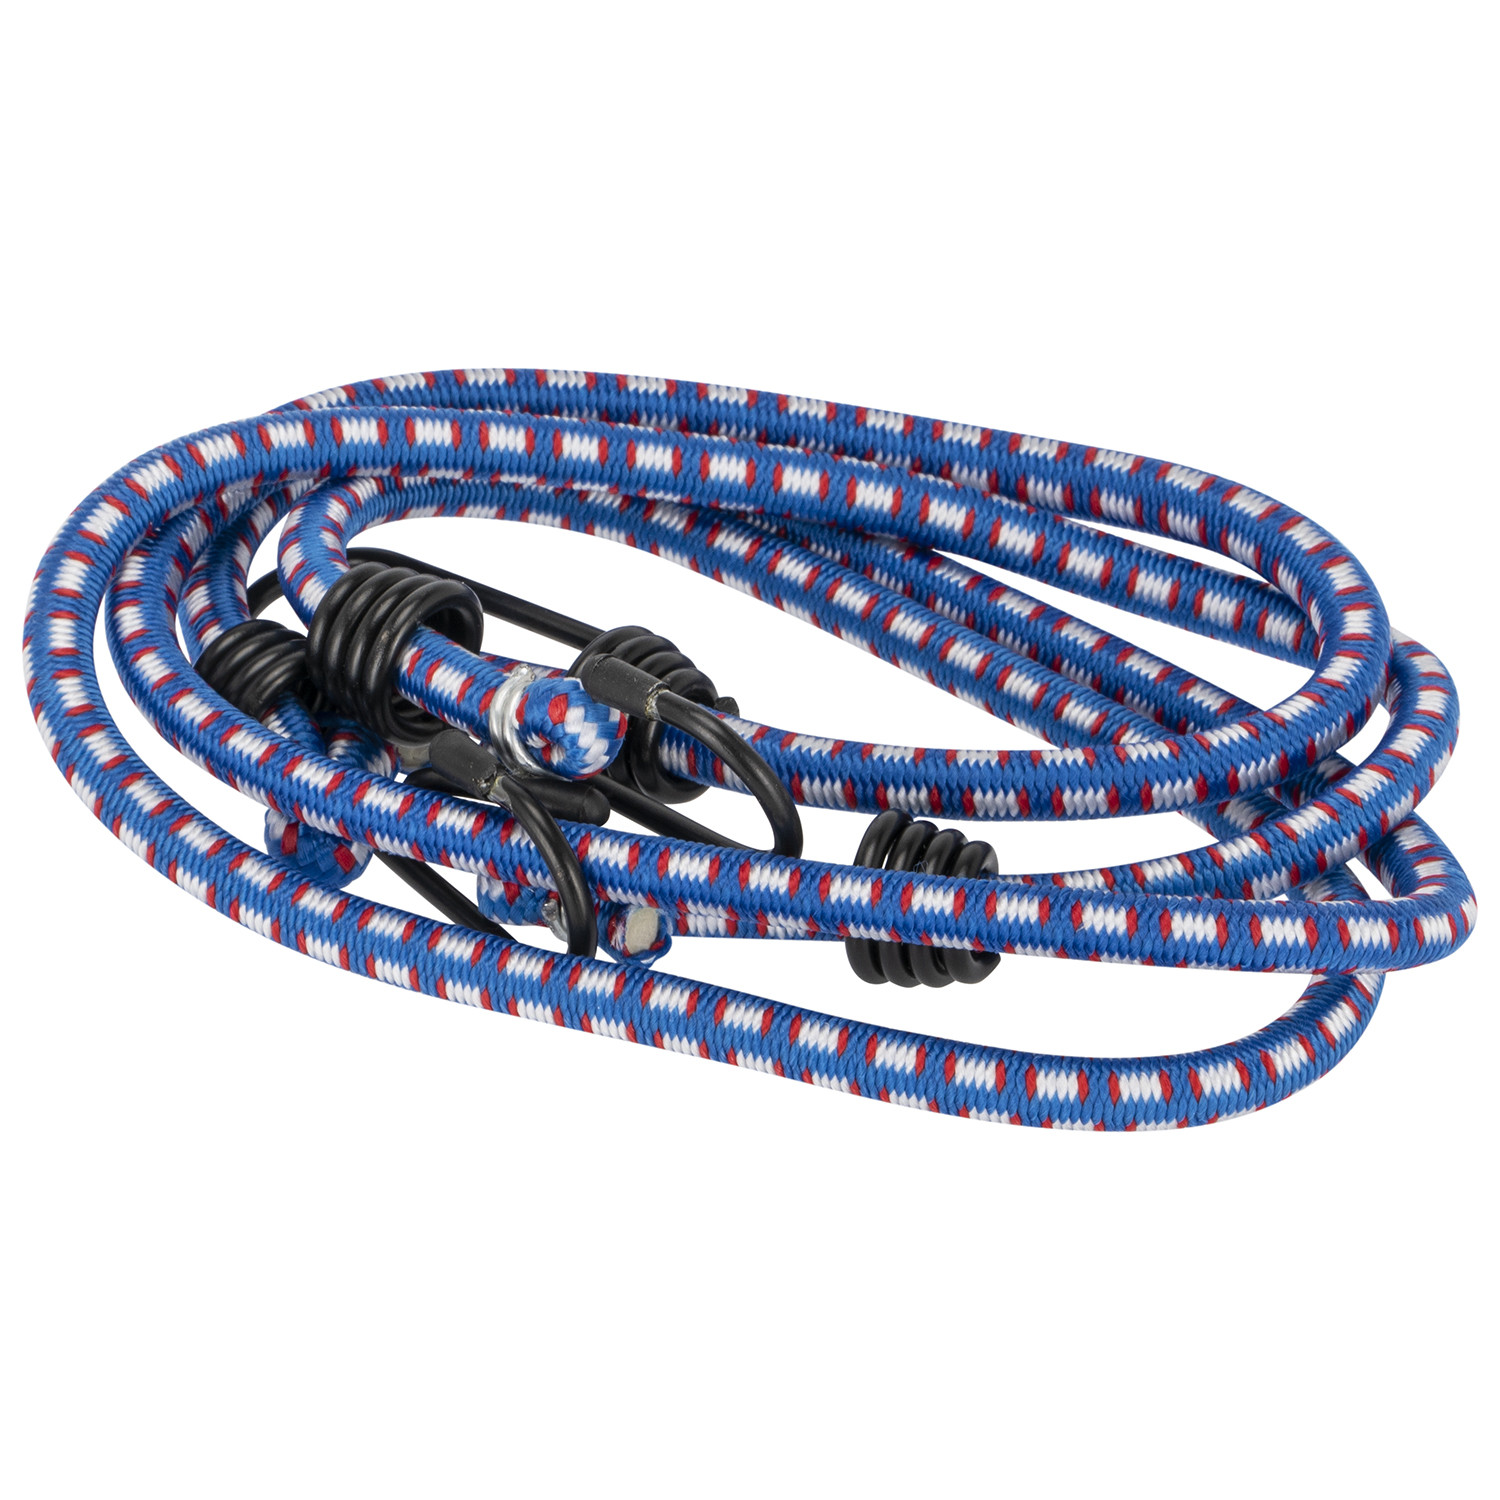 Active Sport Bungee Cords 2 Pack Image 2